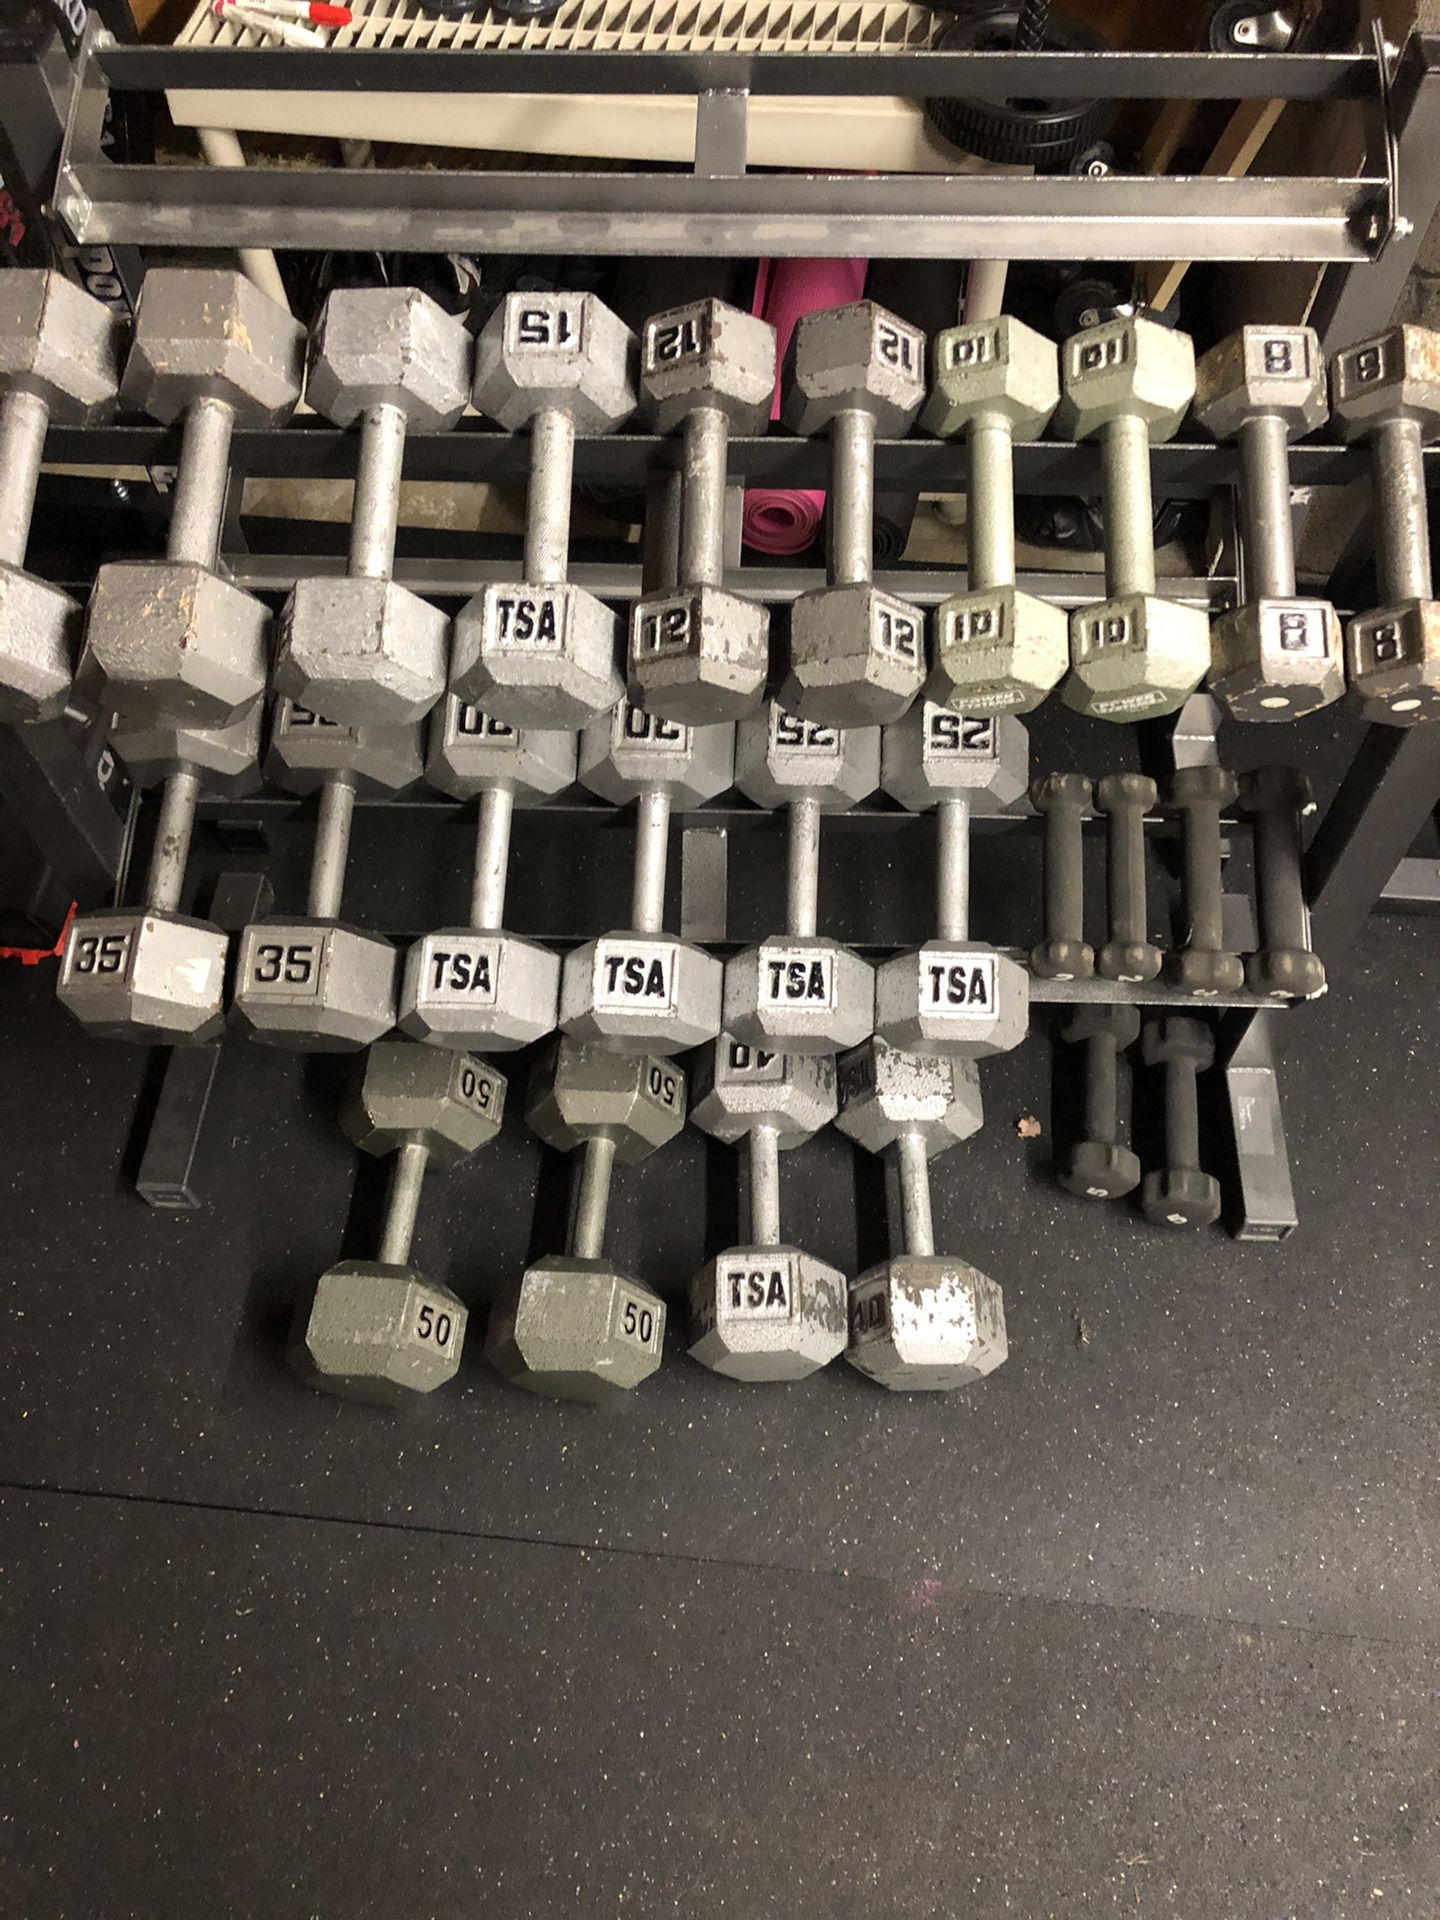 2lb to 50lb Dumbbell Set w/ Two Two-Tier Racks - 510lbs total